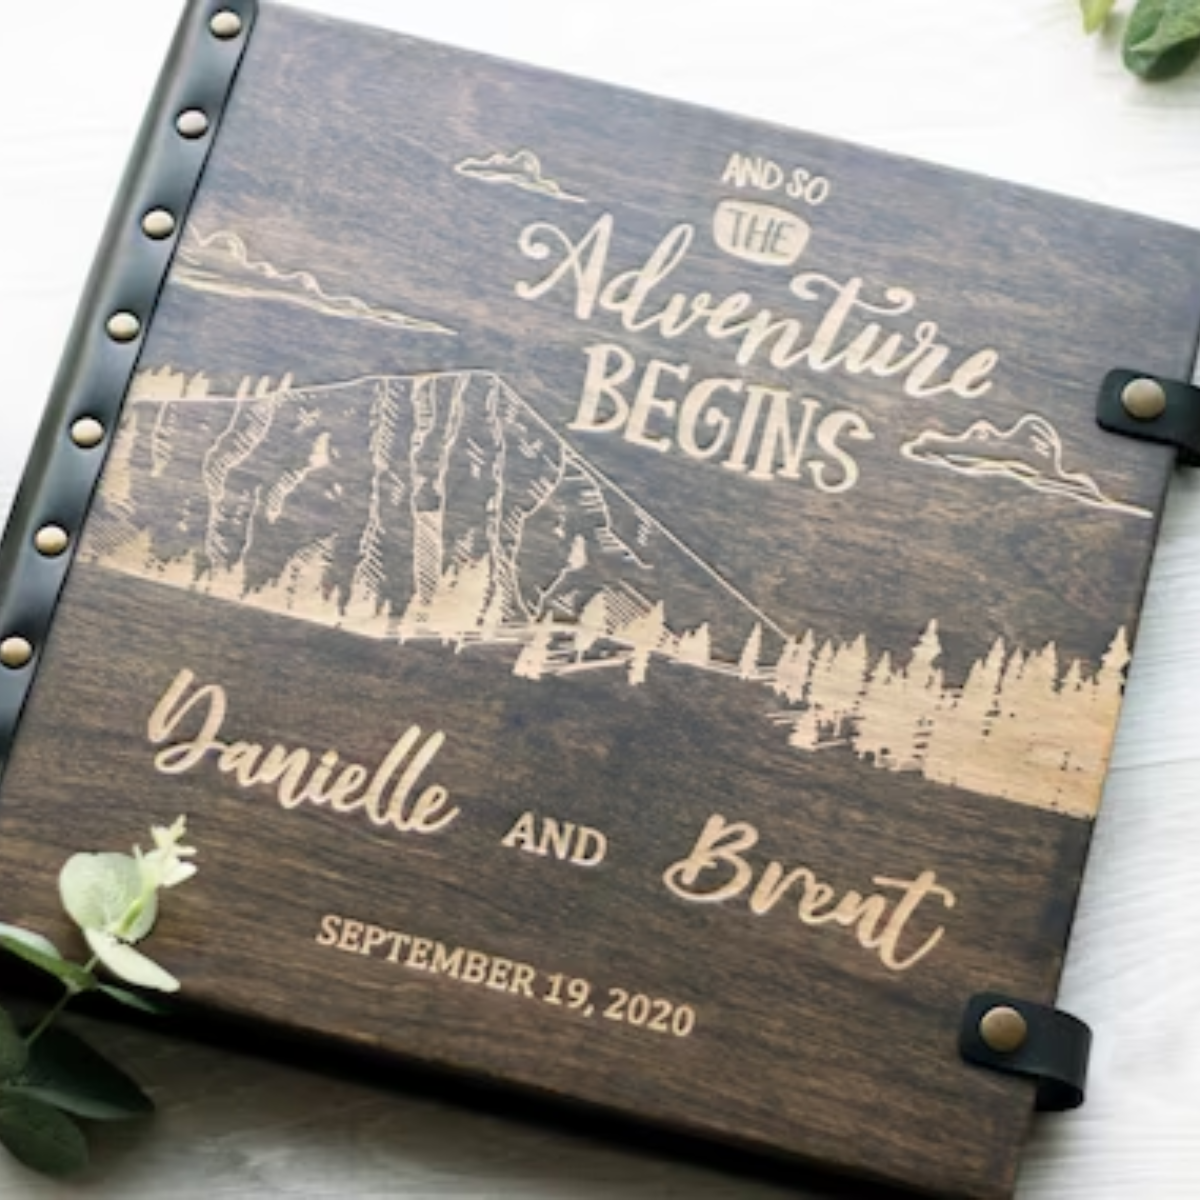 3. Embark on an Unforgettable Journey with an Adventure Journal - The Perfect Anniversary Gift!